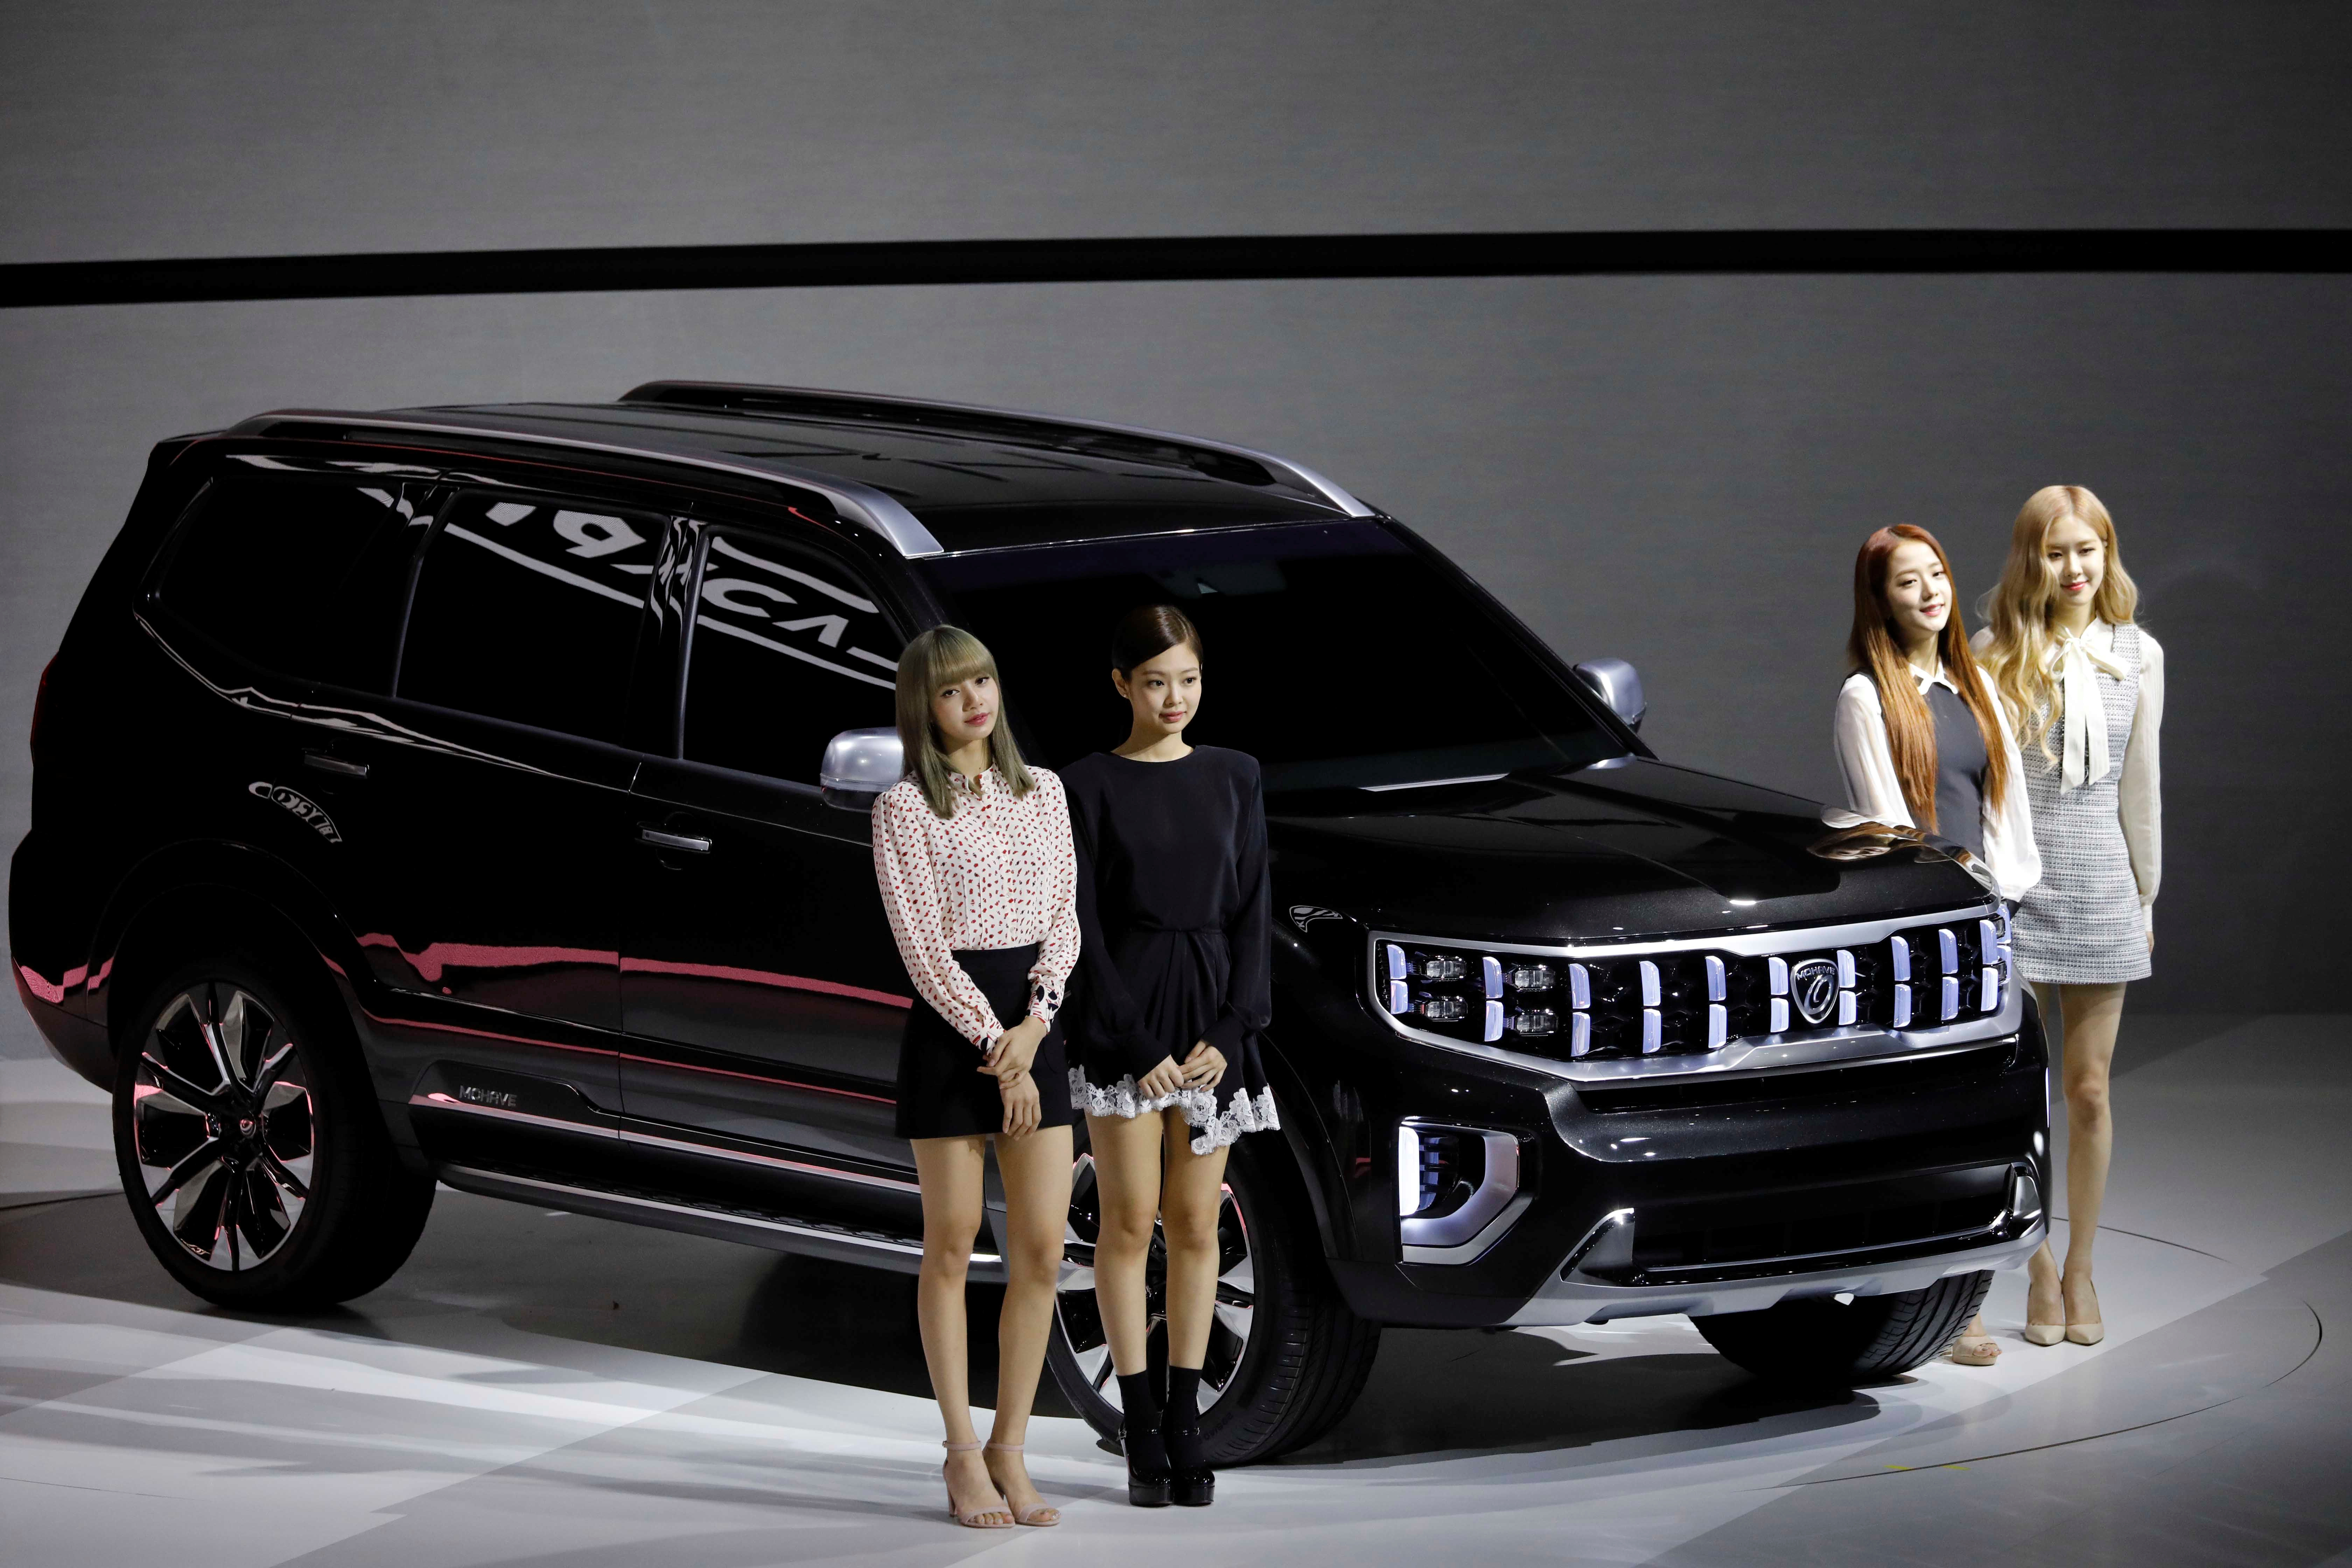 Members of K-pop idol group Black Pink pose for photographs with Kia Motors' Mohave during the 2019 Seoul Motor Show in Goyang